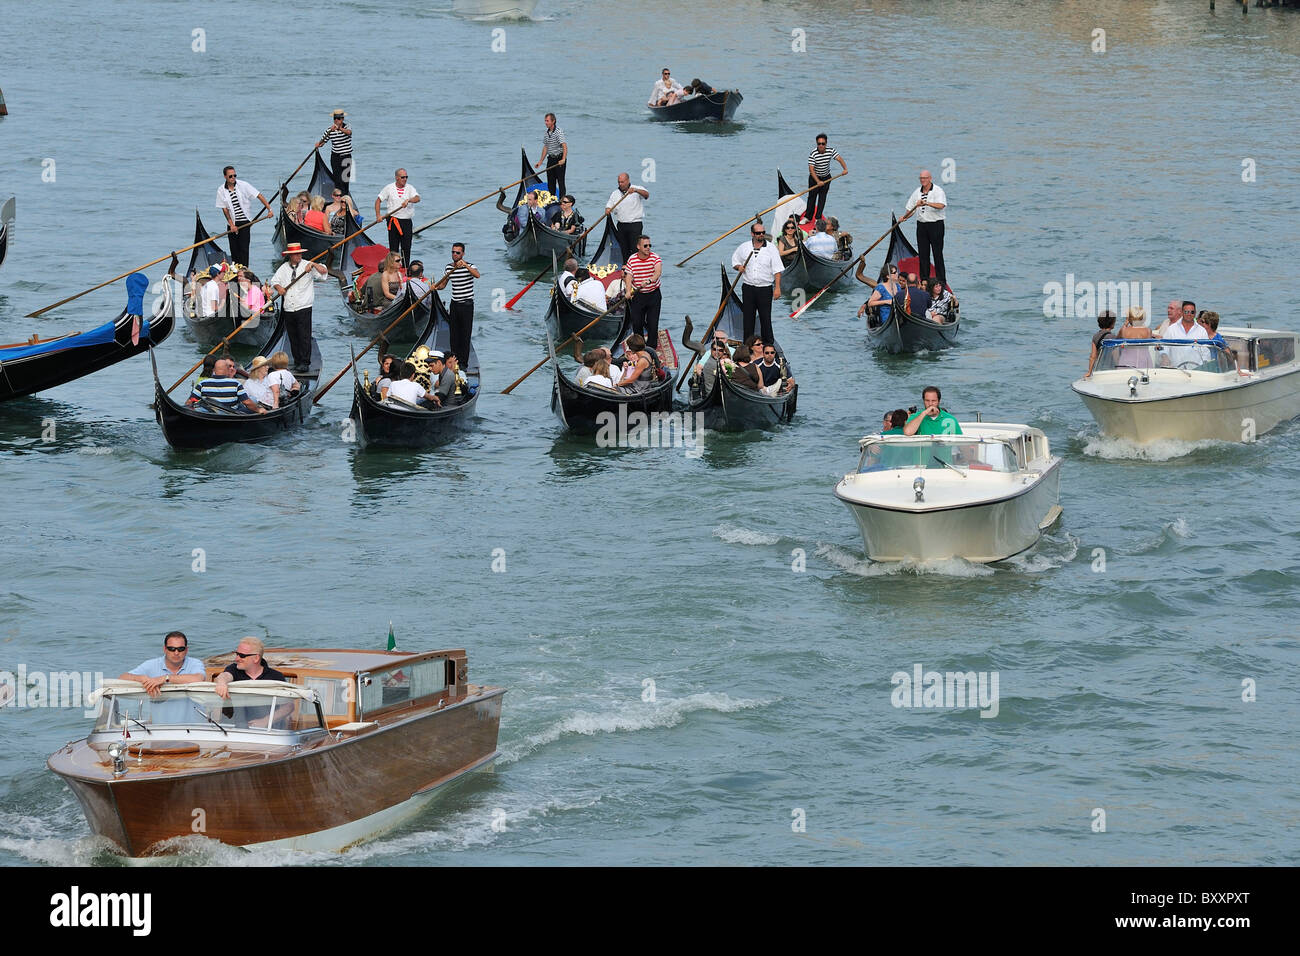 Venice. Italy. Groups of tourists in gondolas on the Grand Canal. Stock Photo